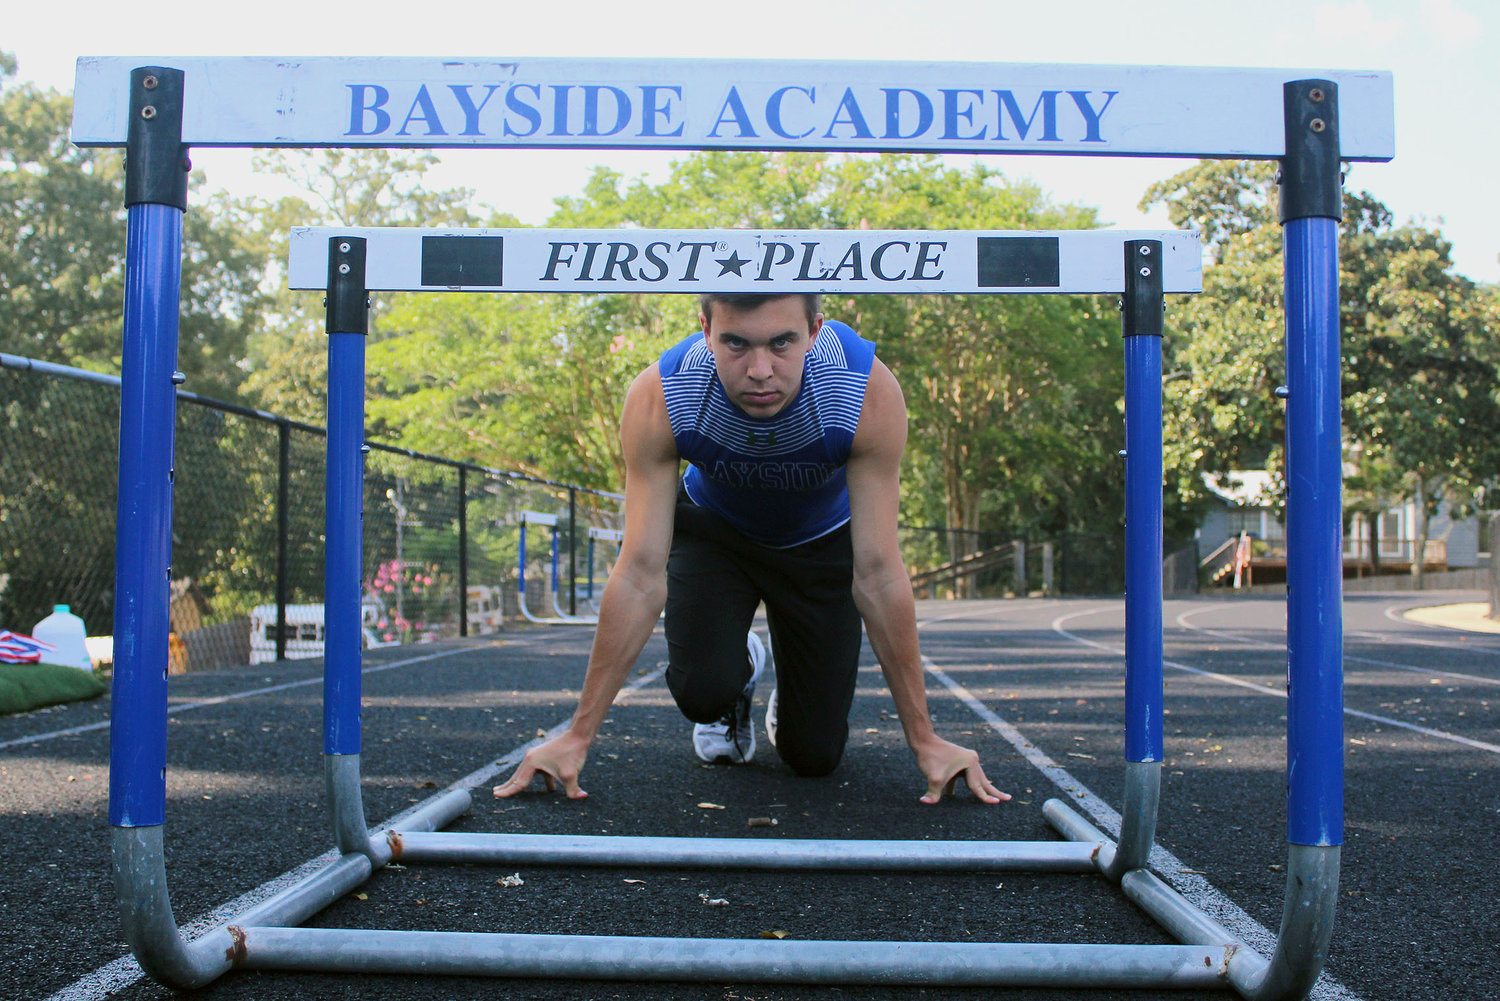 Bayside Academy’s Patrick Daves eyes the hurdles during a June 23 workout at Freedom Field in Daphne. Daves captured a third All-American honor when competing in a pair of national meets ahead of joining the Alabama Crimson Tide track and field team this fall.